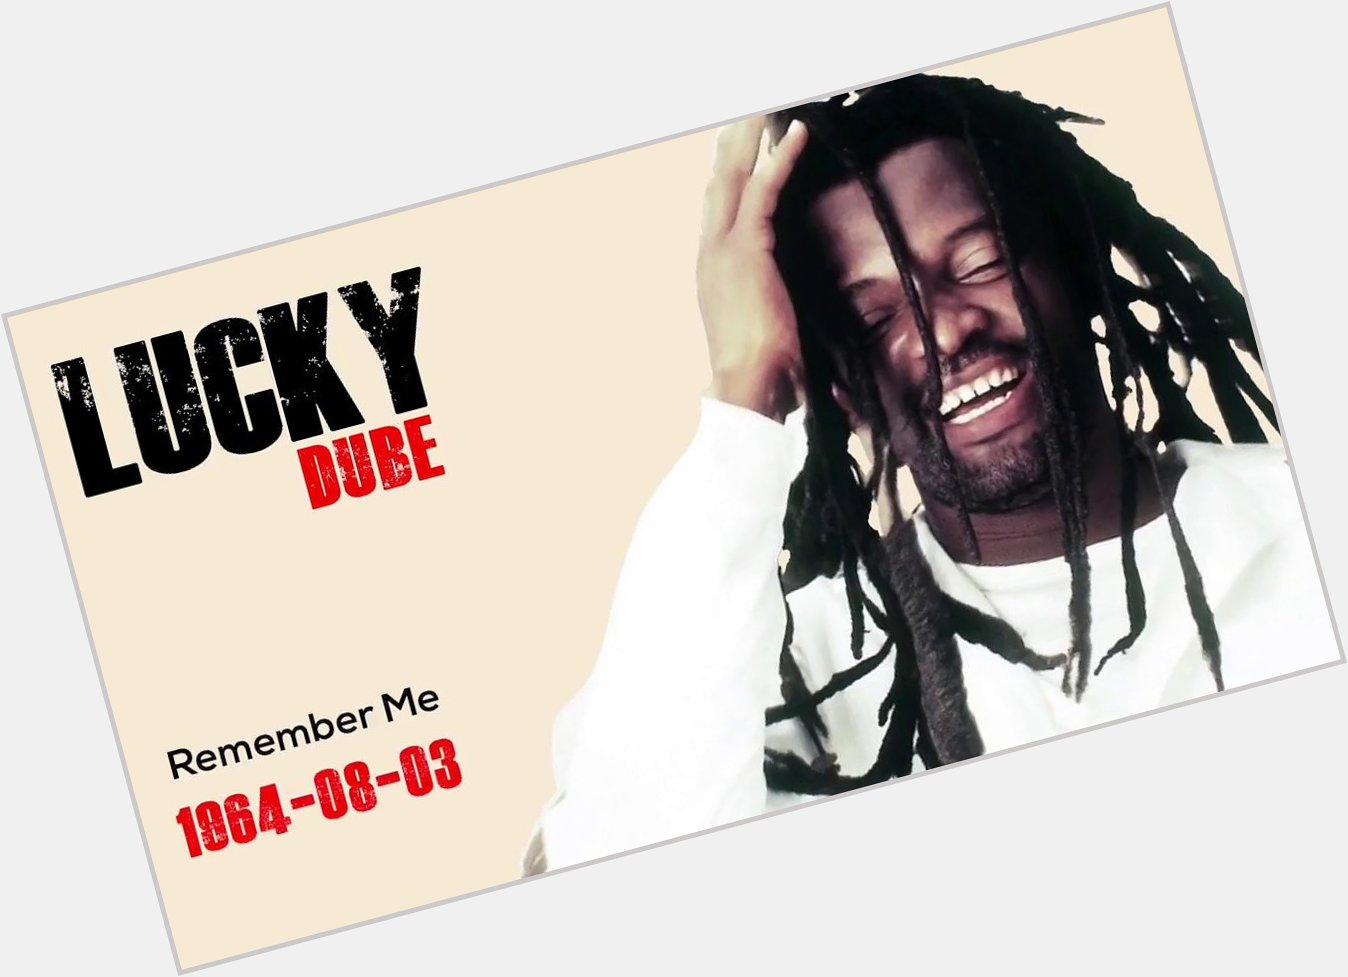 Happy Birthday Lucky Dube This is a small tribute to your life and what you stood for! Gone but never forgotten! 